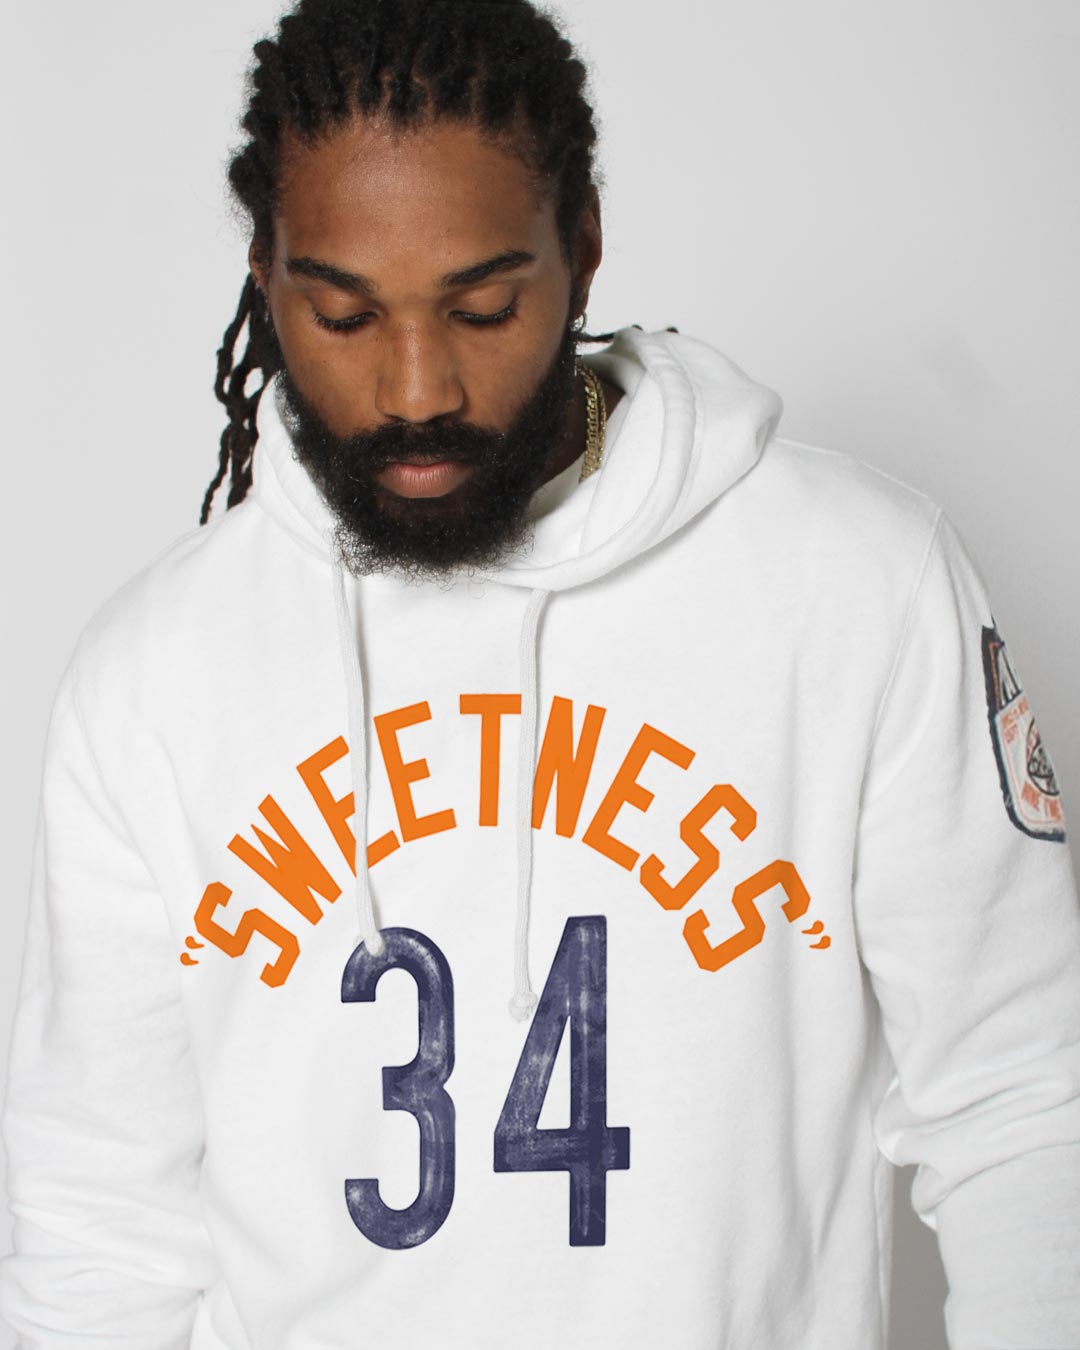 Walter Payton Sweetness #34 Pullover Hoody - Roots of Inc dba Roots of Fight